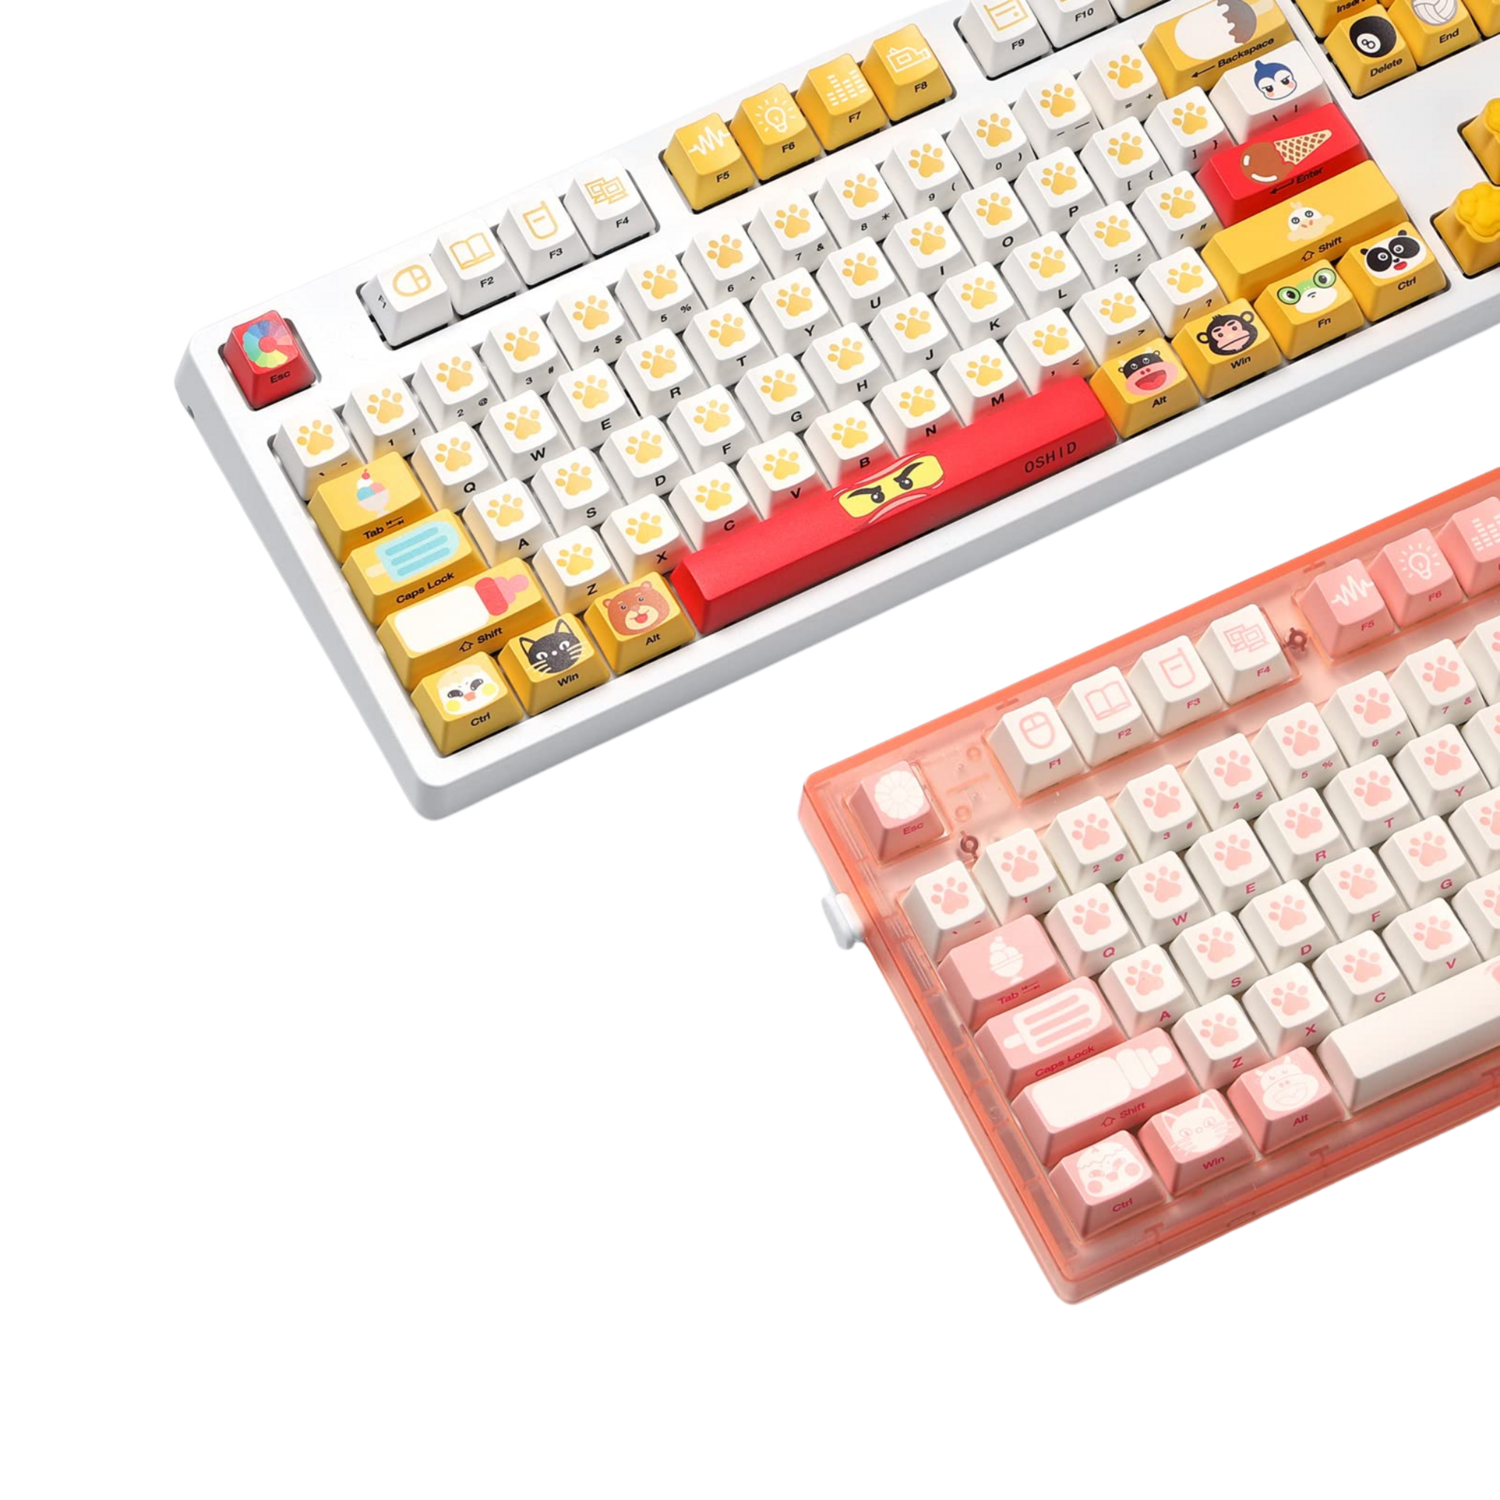 CAT CLAWS KEYCAPS